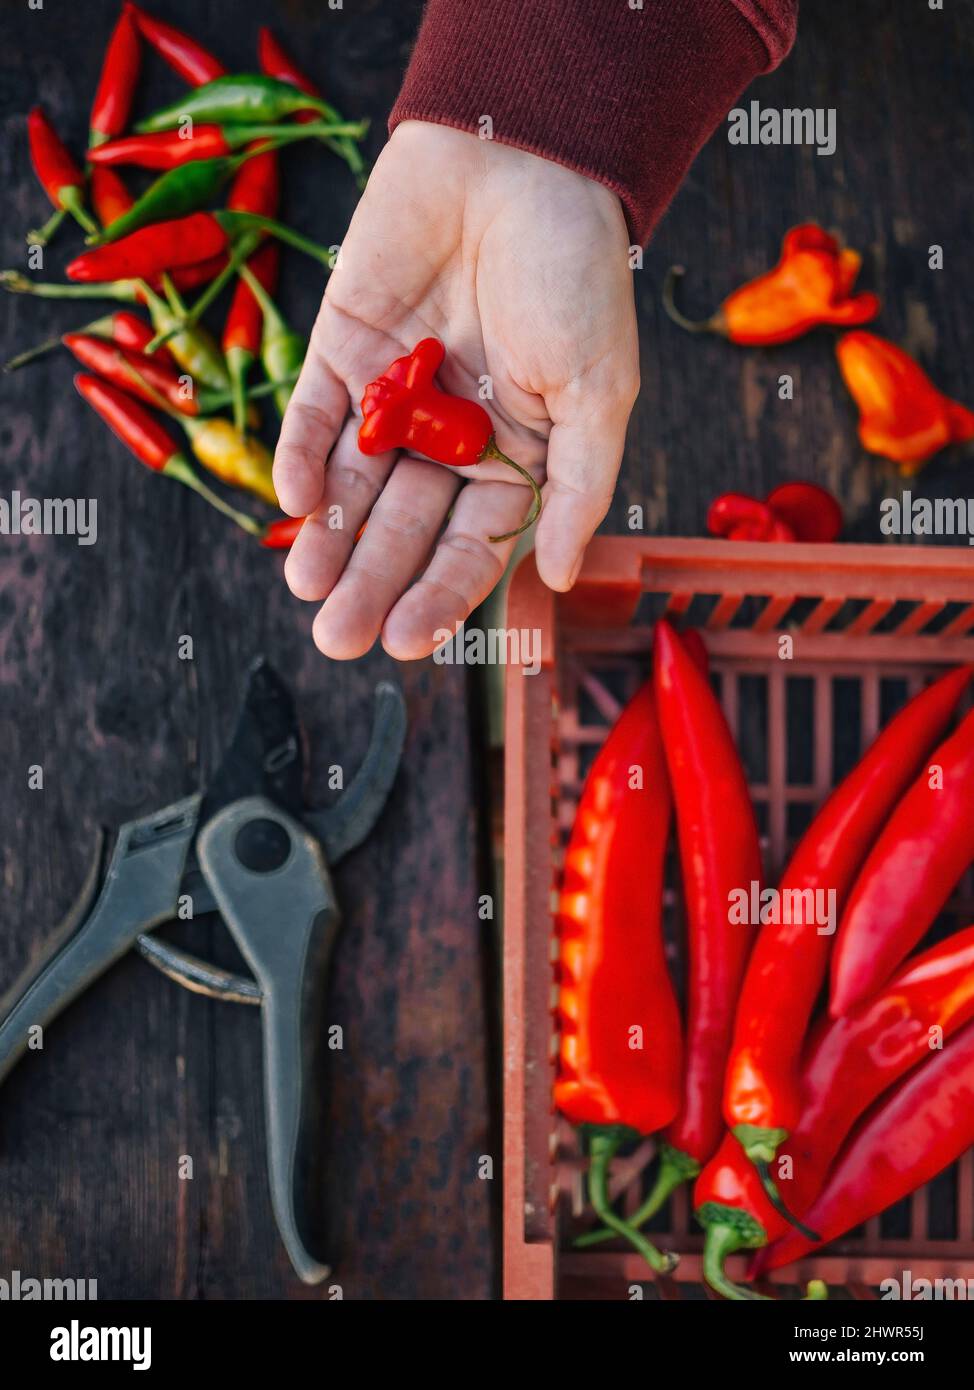 Woman with fresh red chili pepper over table Stock Photo